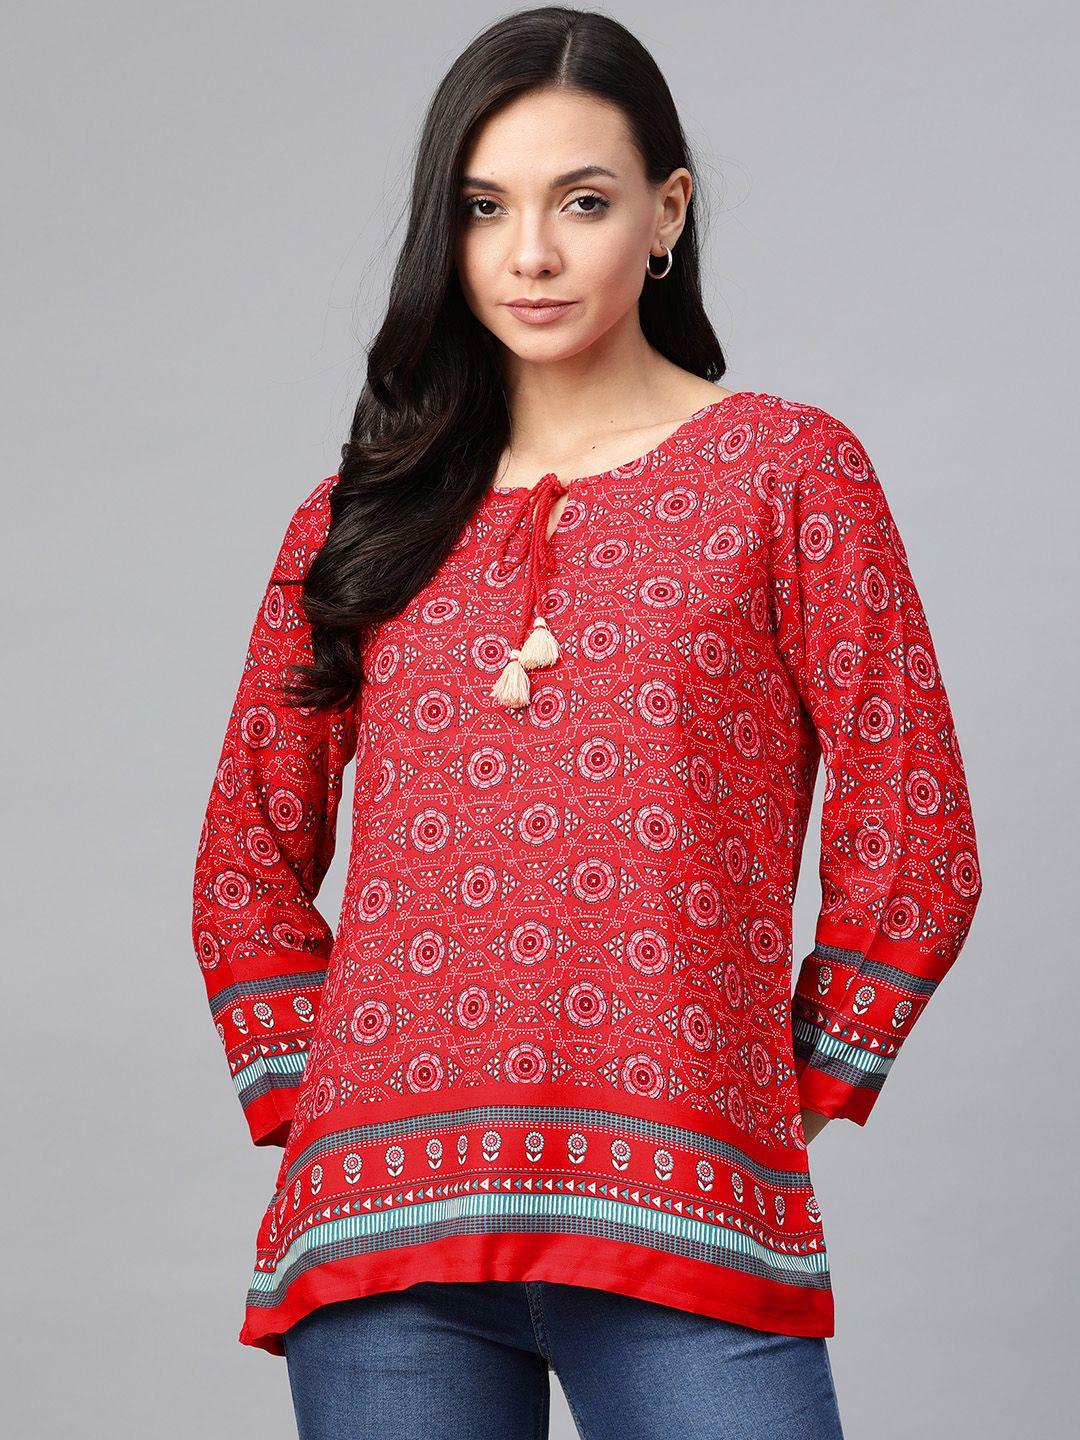 global desi women red & teal blue ethnic print sustainable a-line top